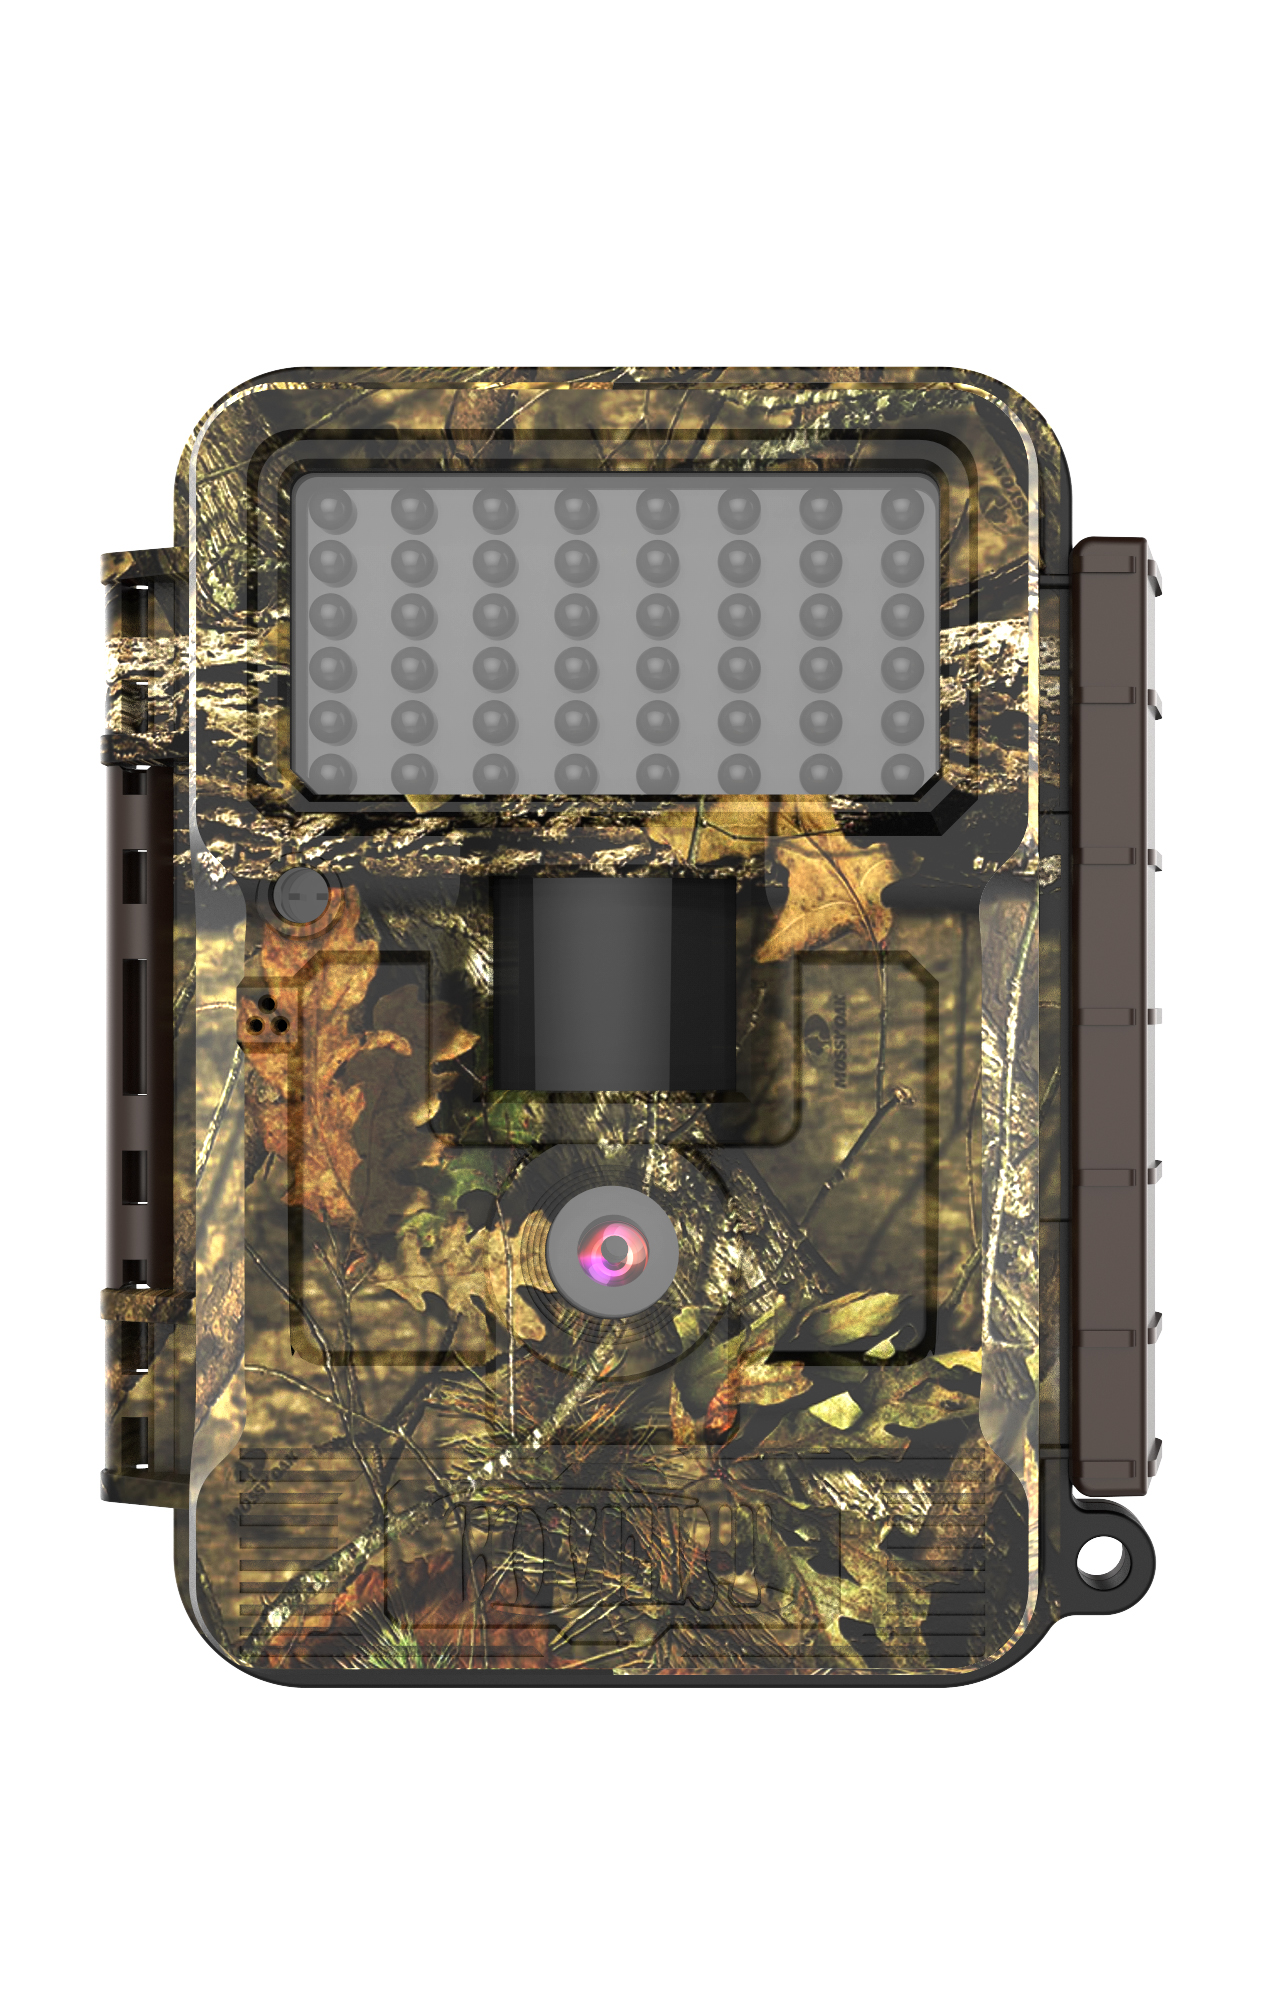 Covert 5748 Trail Camera for sale online 